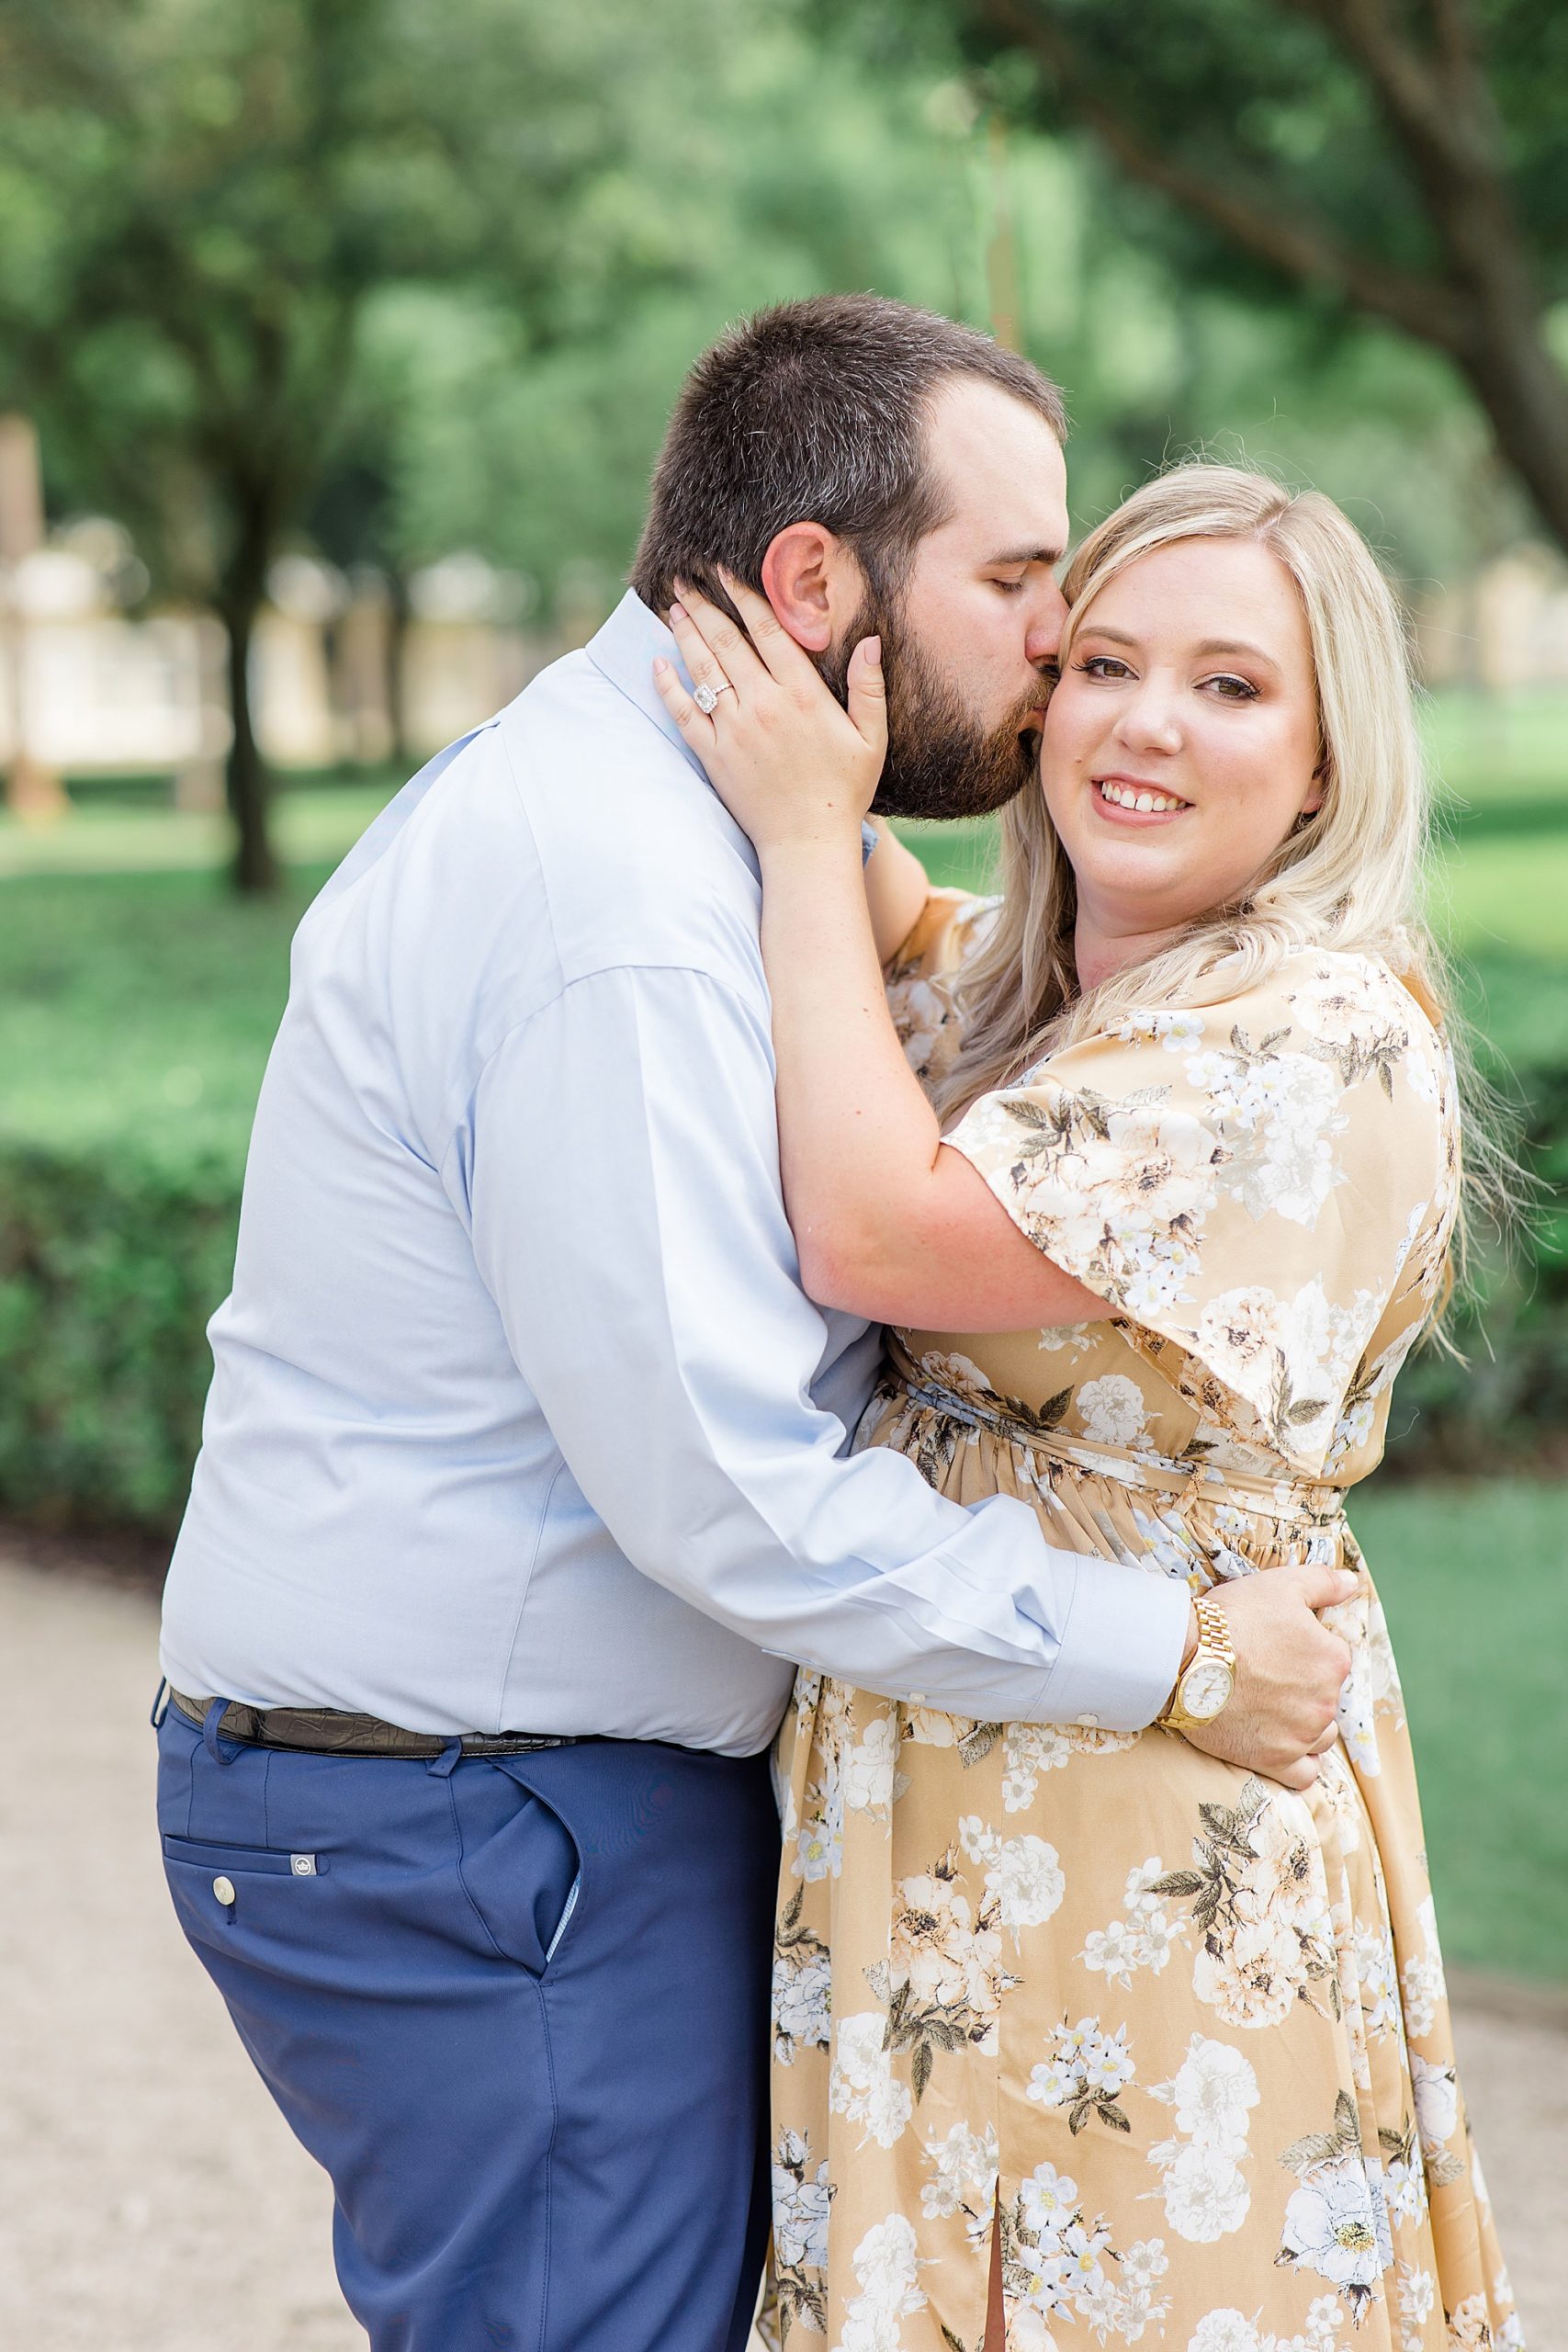 Kimball Art Museum engagement session at sunset in Dallas TX